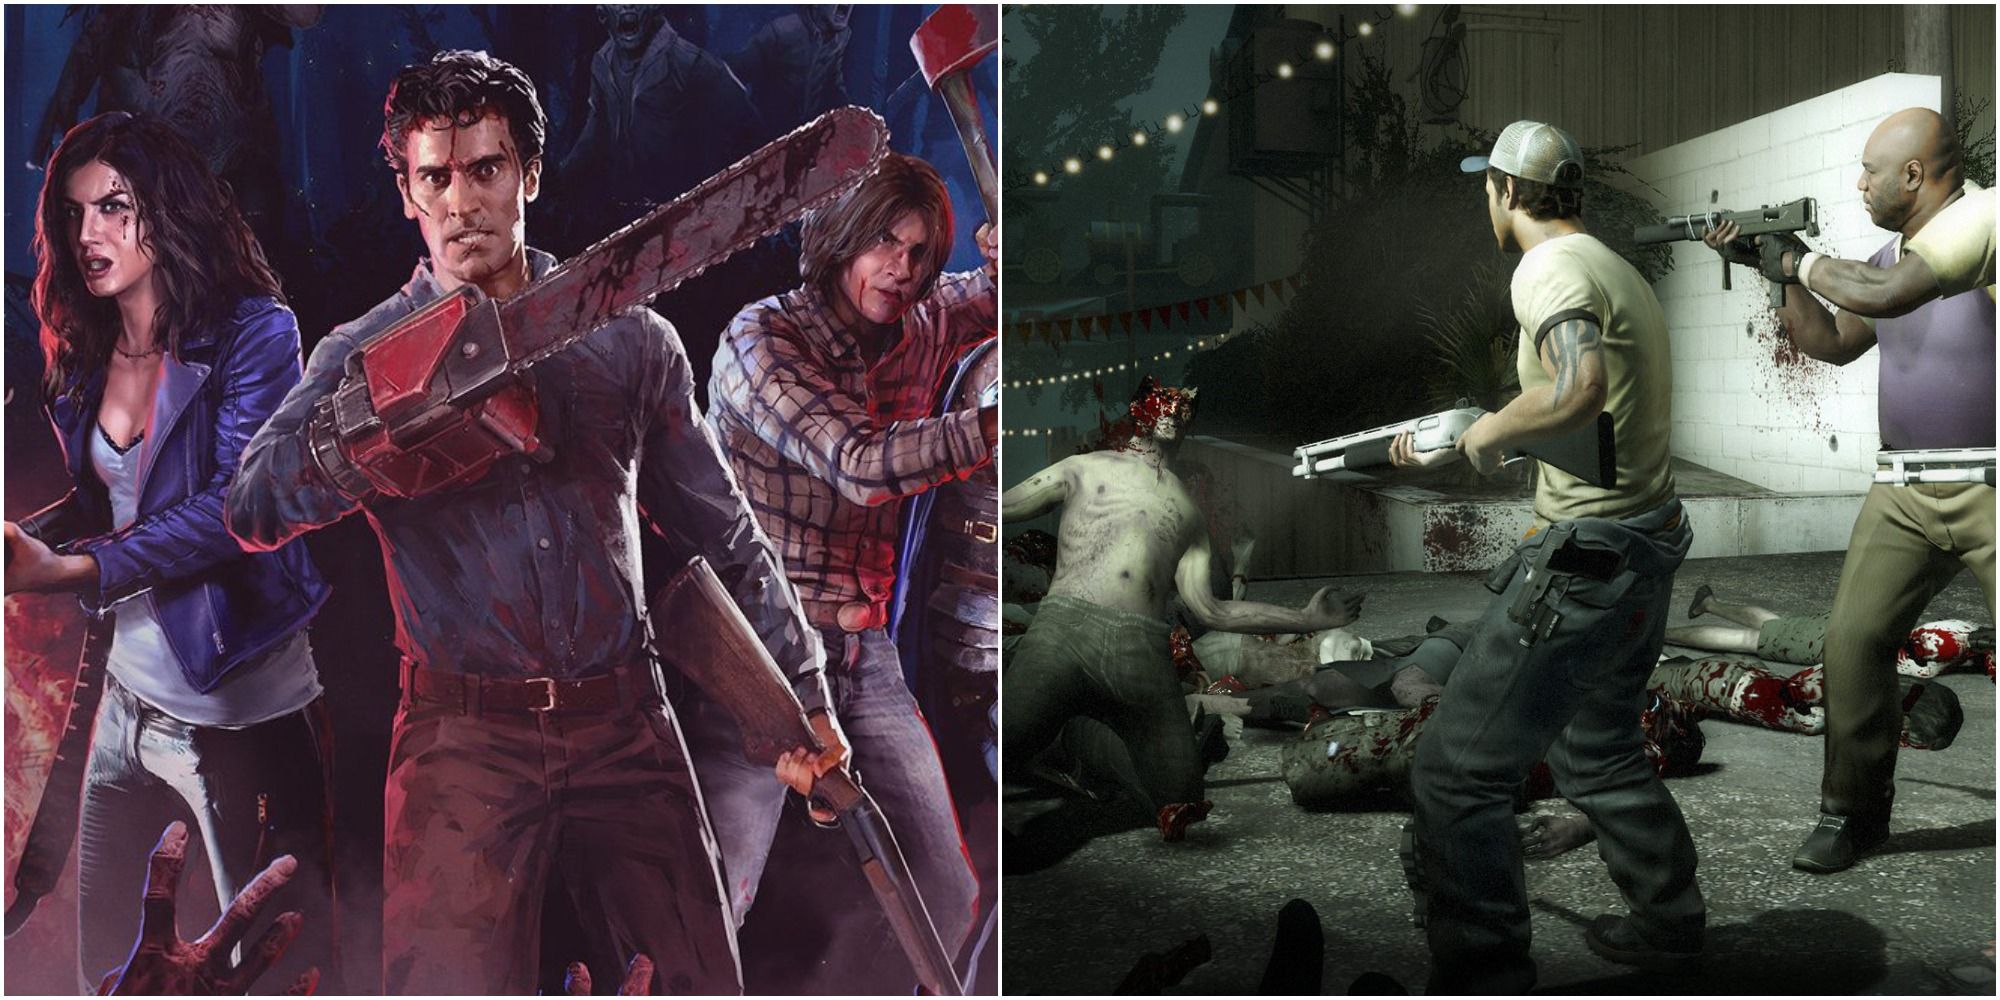 A collage showing Ash and crew in Evil Dead: The Game and a group of survivor fighting off zombies in Left 4 Dead 2